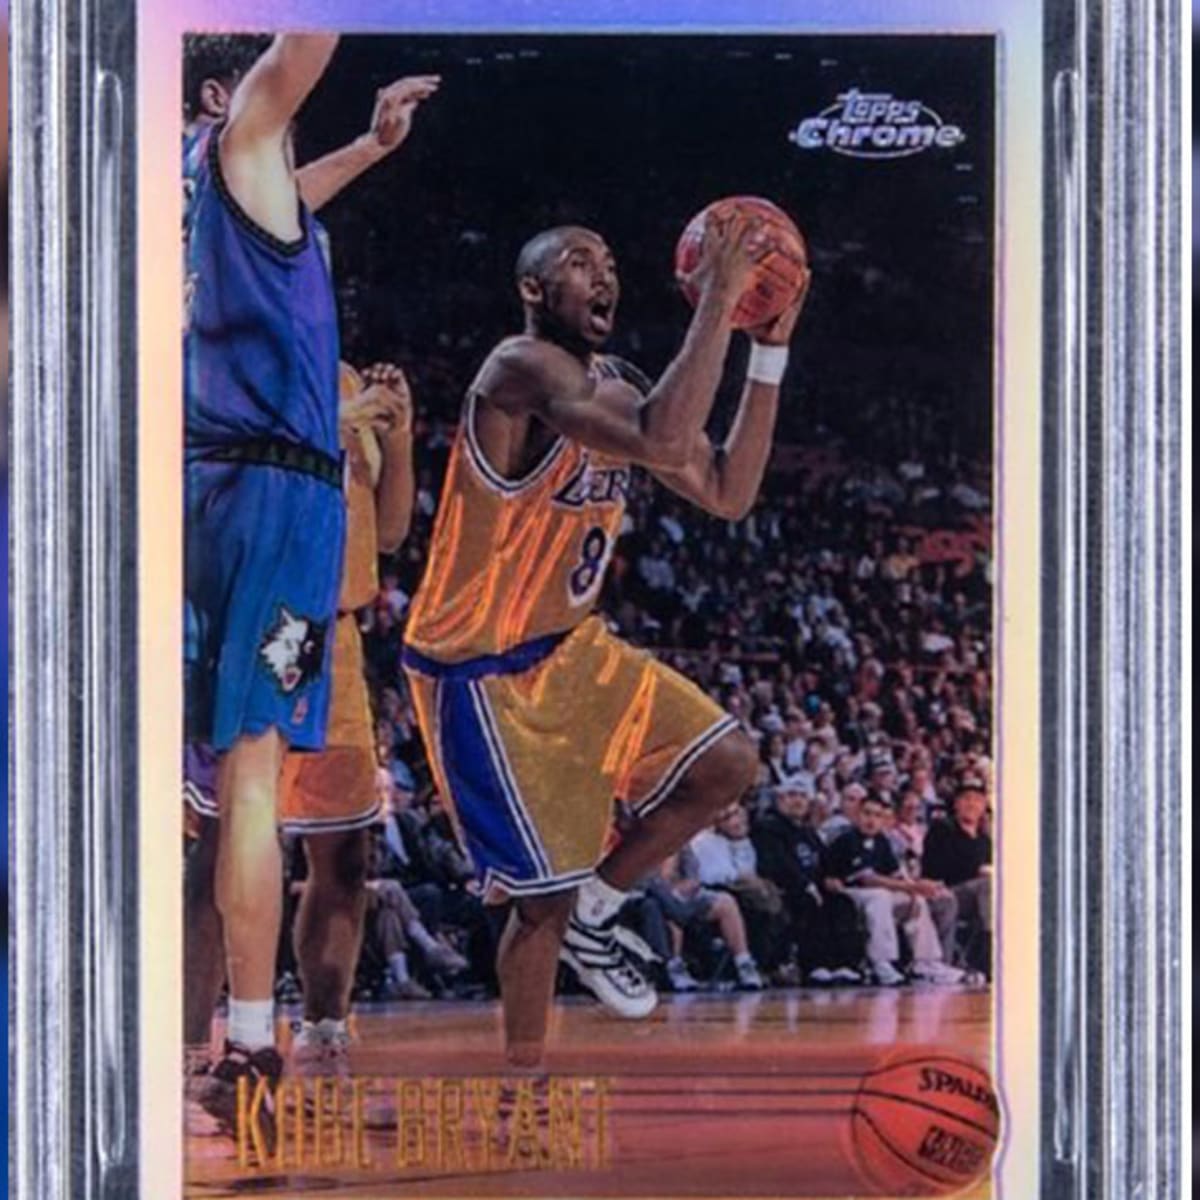 LeBron James rookie card sells for record-breaking $5.2 million